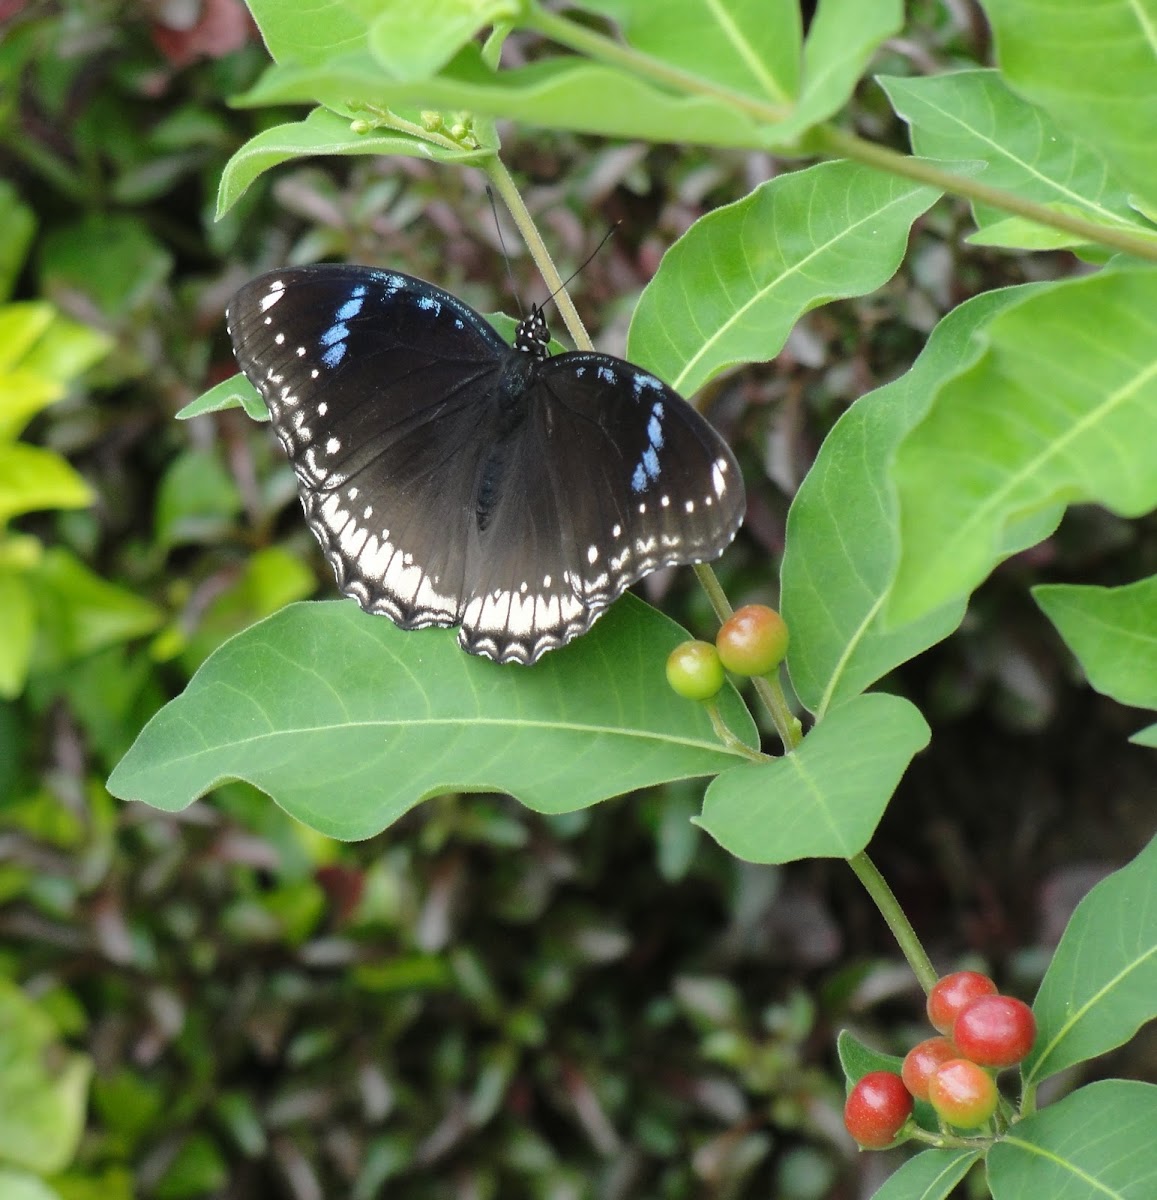 The great eggfly female